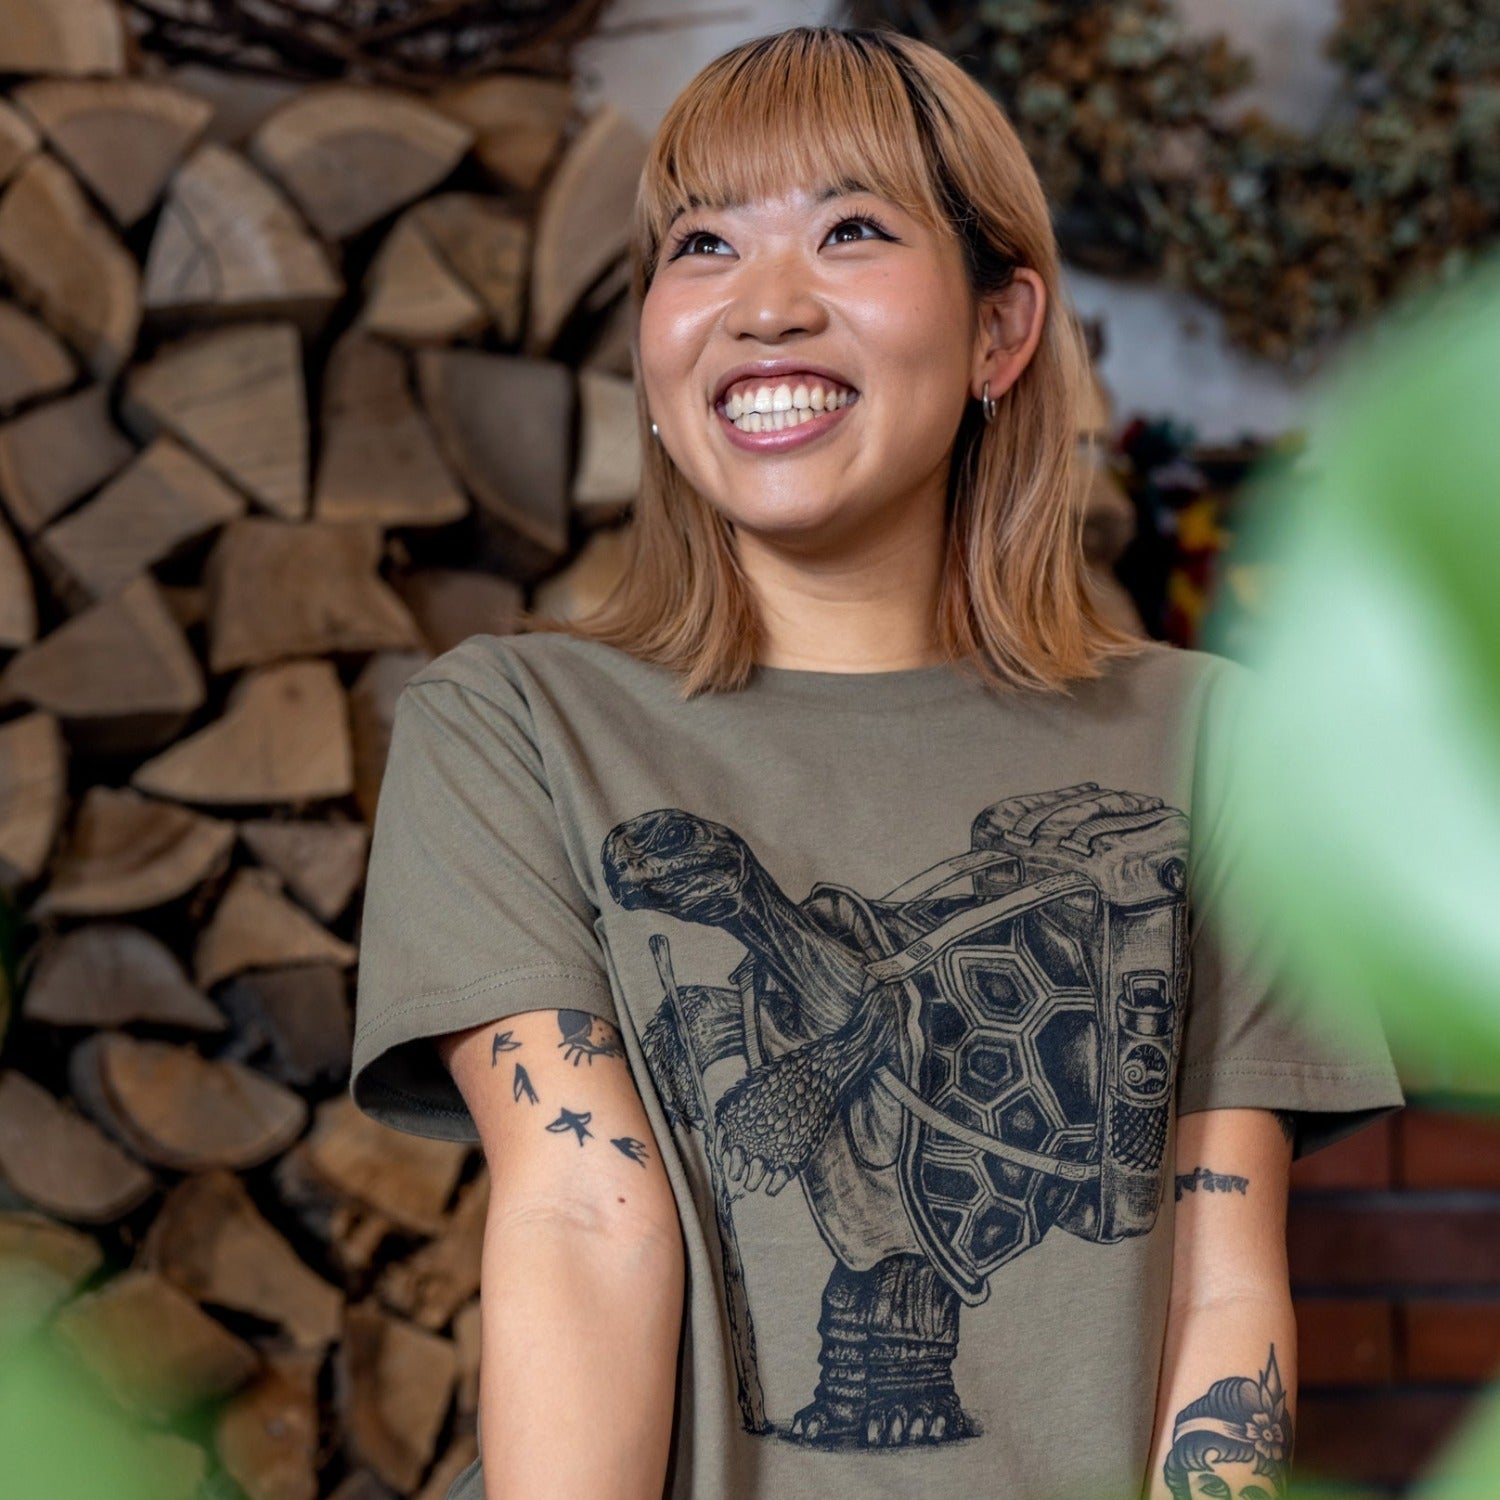 Woman smiling really big. Stacked split wood in the background. Tattoos on her arms. Wearing an army green t-shirt with dark blue ink of a hiking tortoise.  